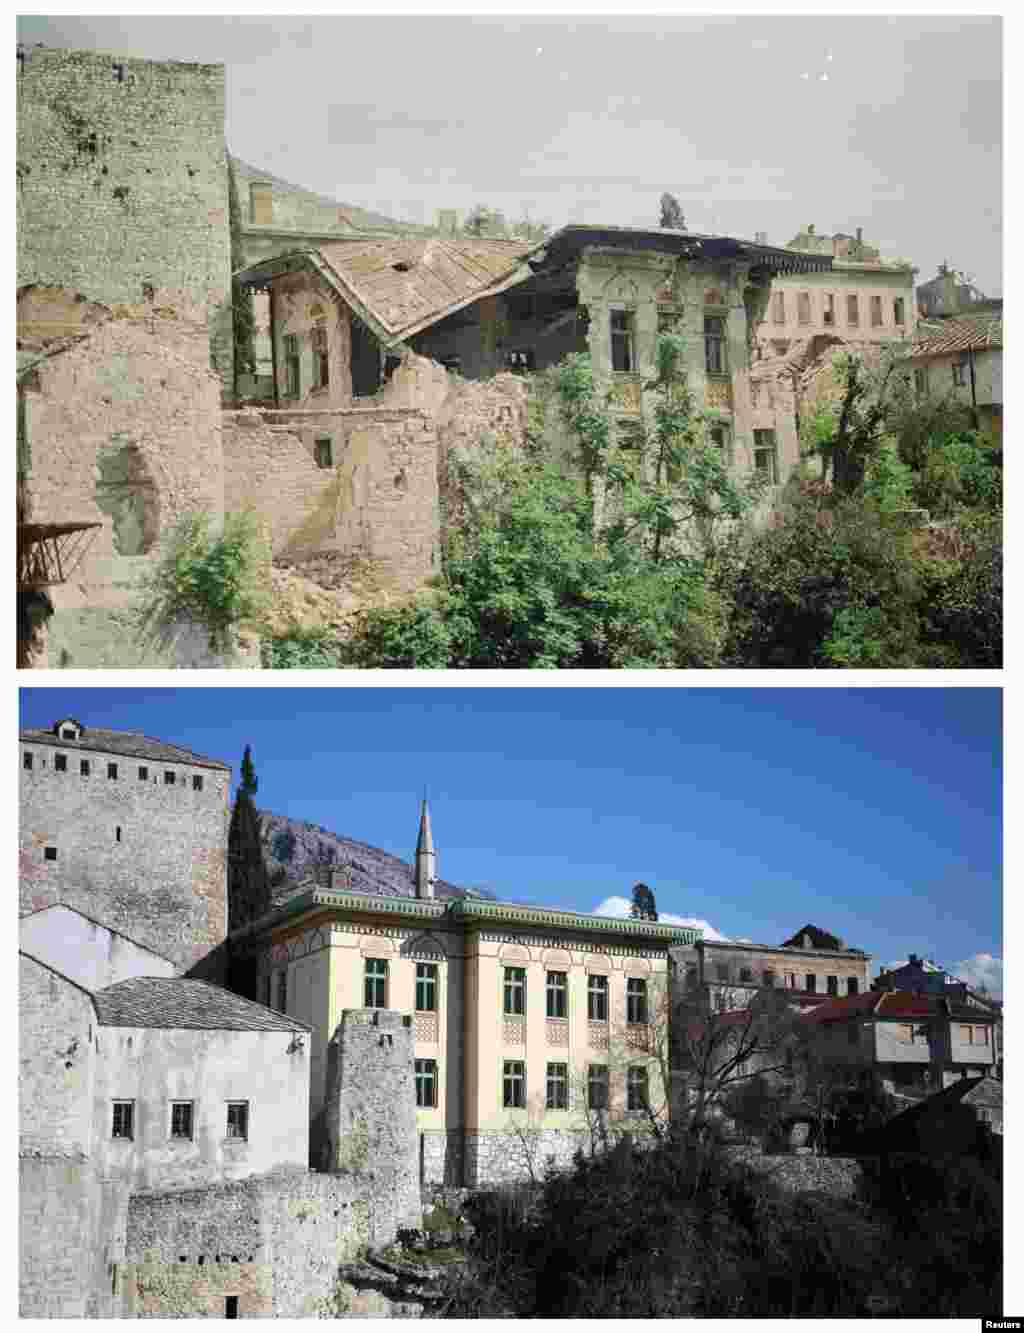 Damaged buildings in the old part of Mostar city in June 1993. The photo underneath shows the same place on February 23, 2013